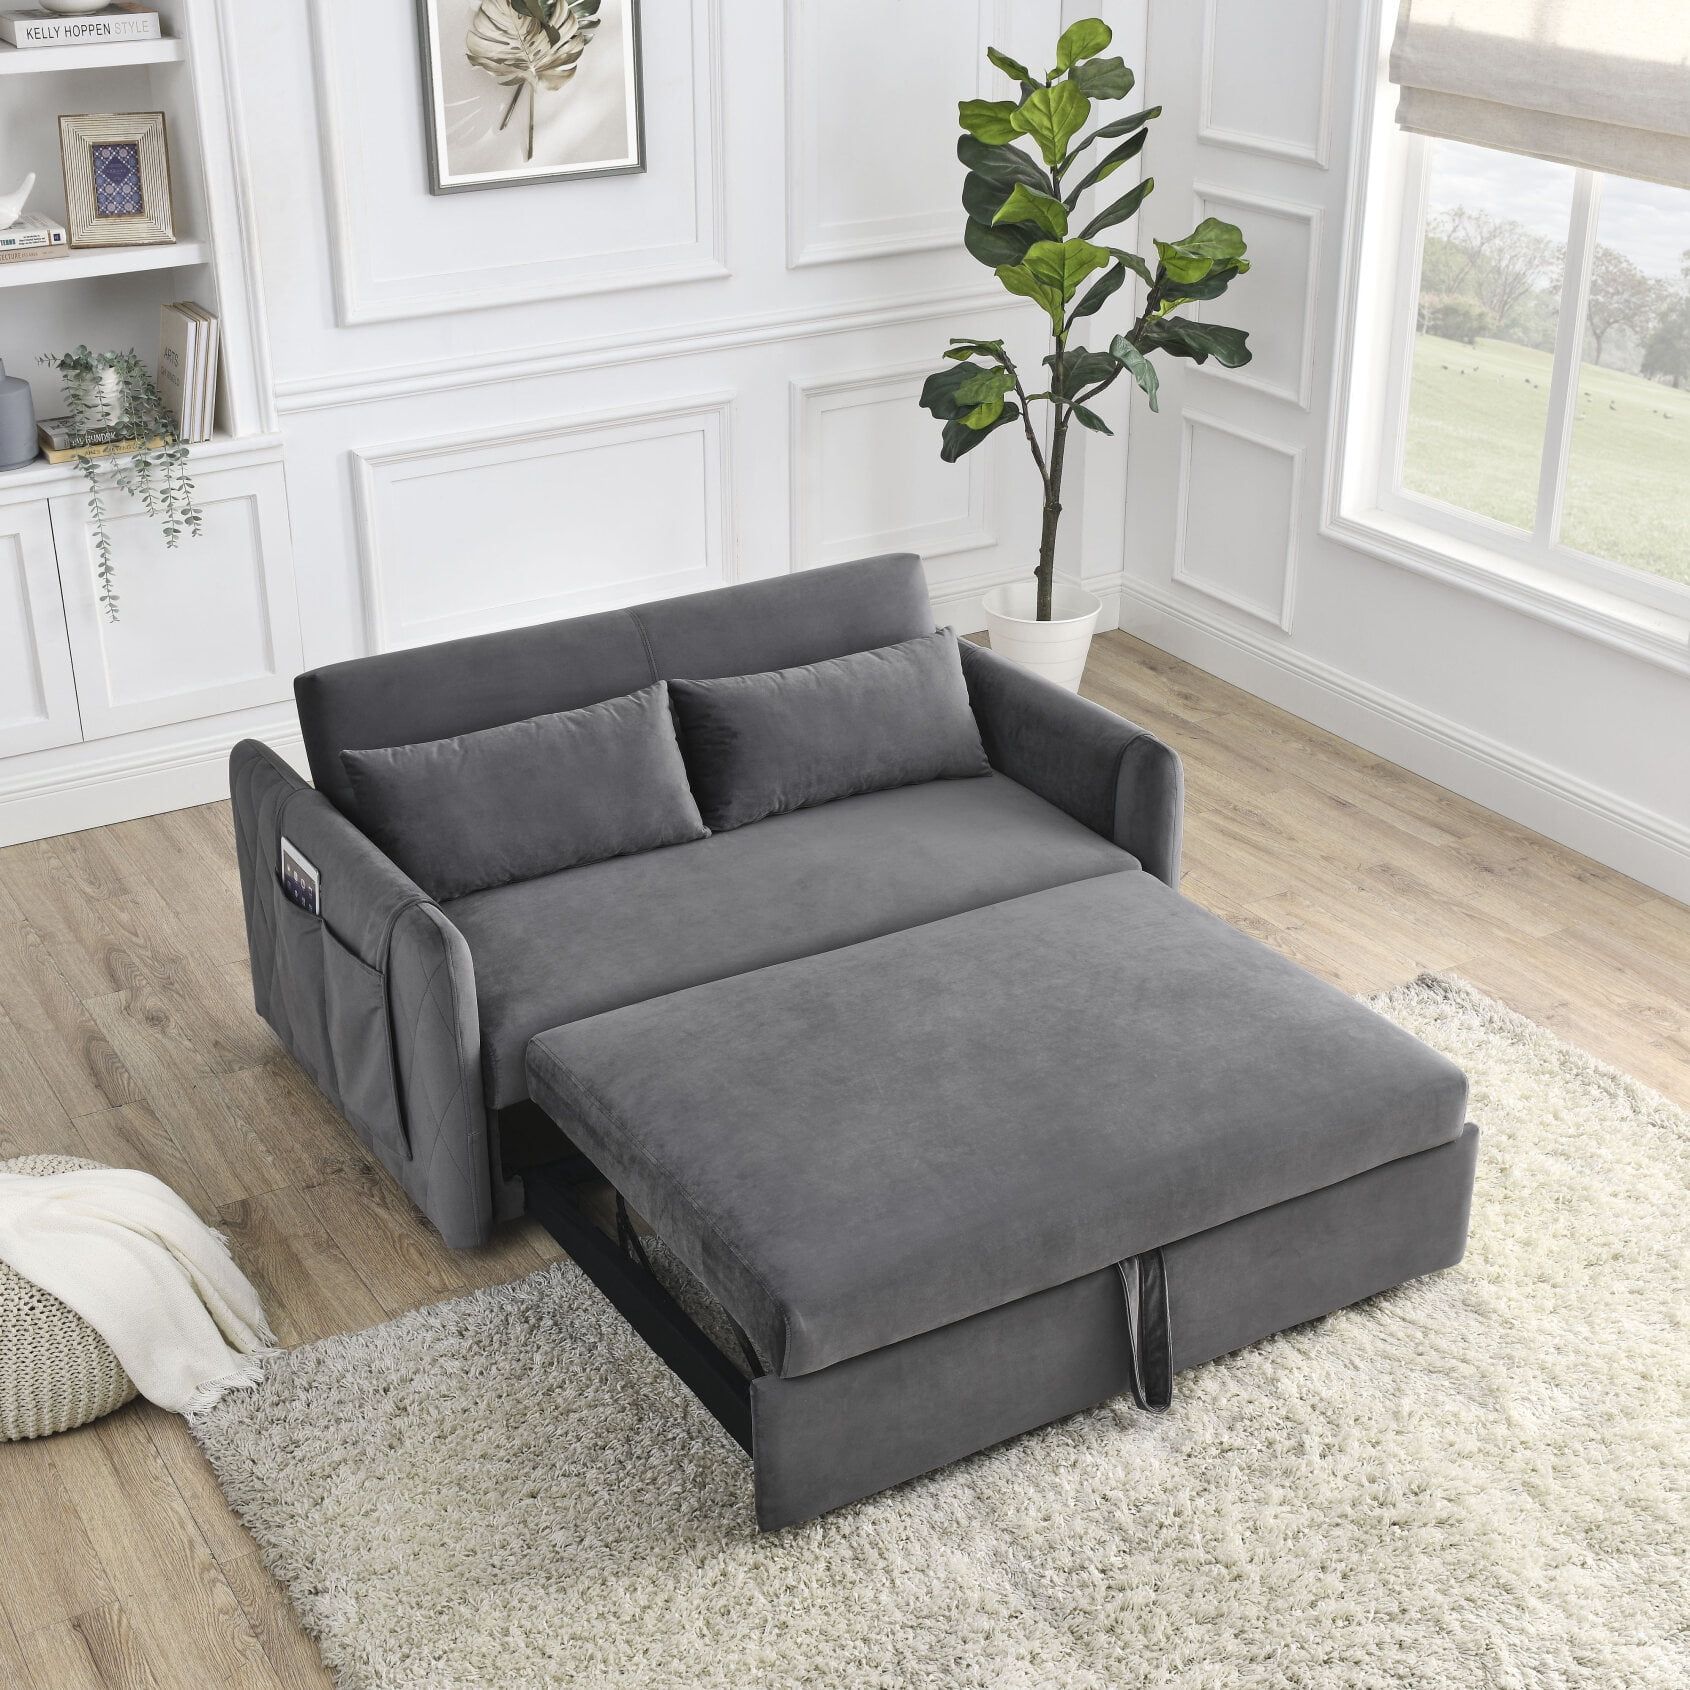 3 In 1 Convertible Sleeper Sofa Bed, Upholstered Pull Out Sofa With 2  Detachable Arm Pockets, Futon Sofa Bed With 2 Pillows And Adjustable  Backrest For Apartment Living Room – Walmart With 3 In 1 Gray Pull Out Sleeper Sofas (View 15 of 15)